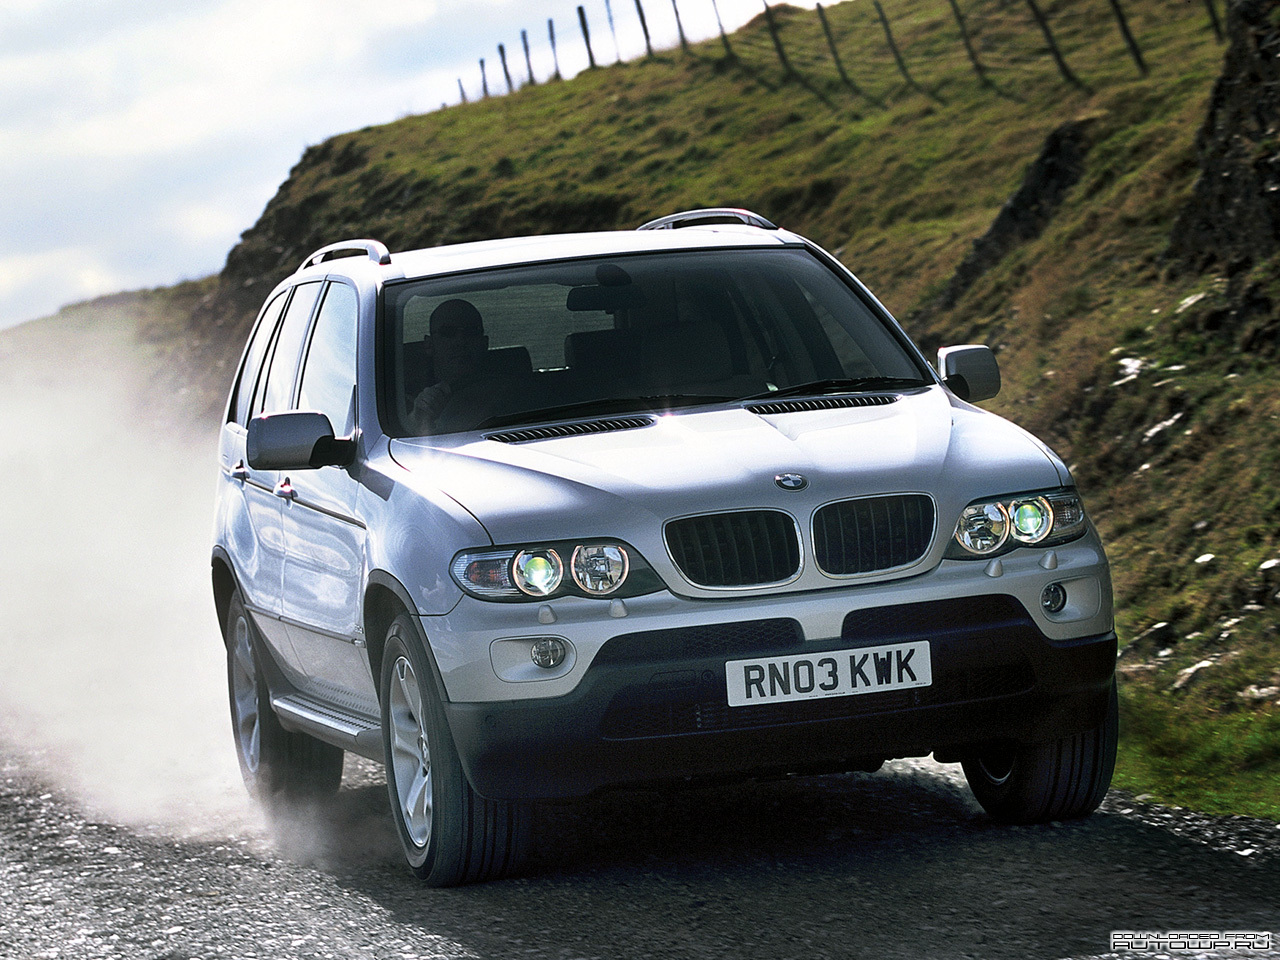 BMW X5 E53 photos PhotoGallery with 77 pics